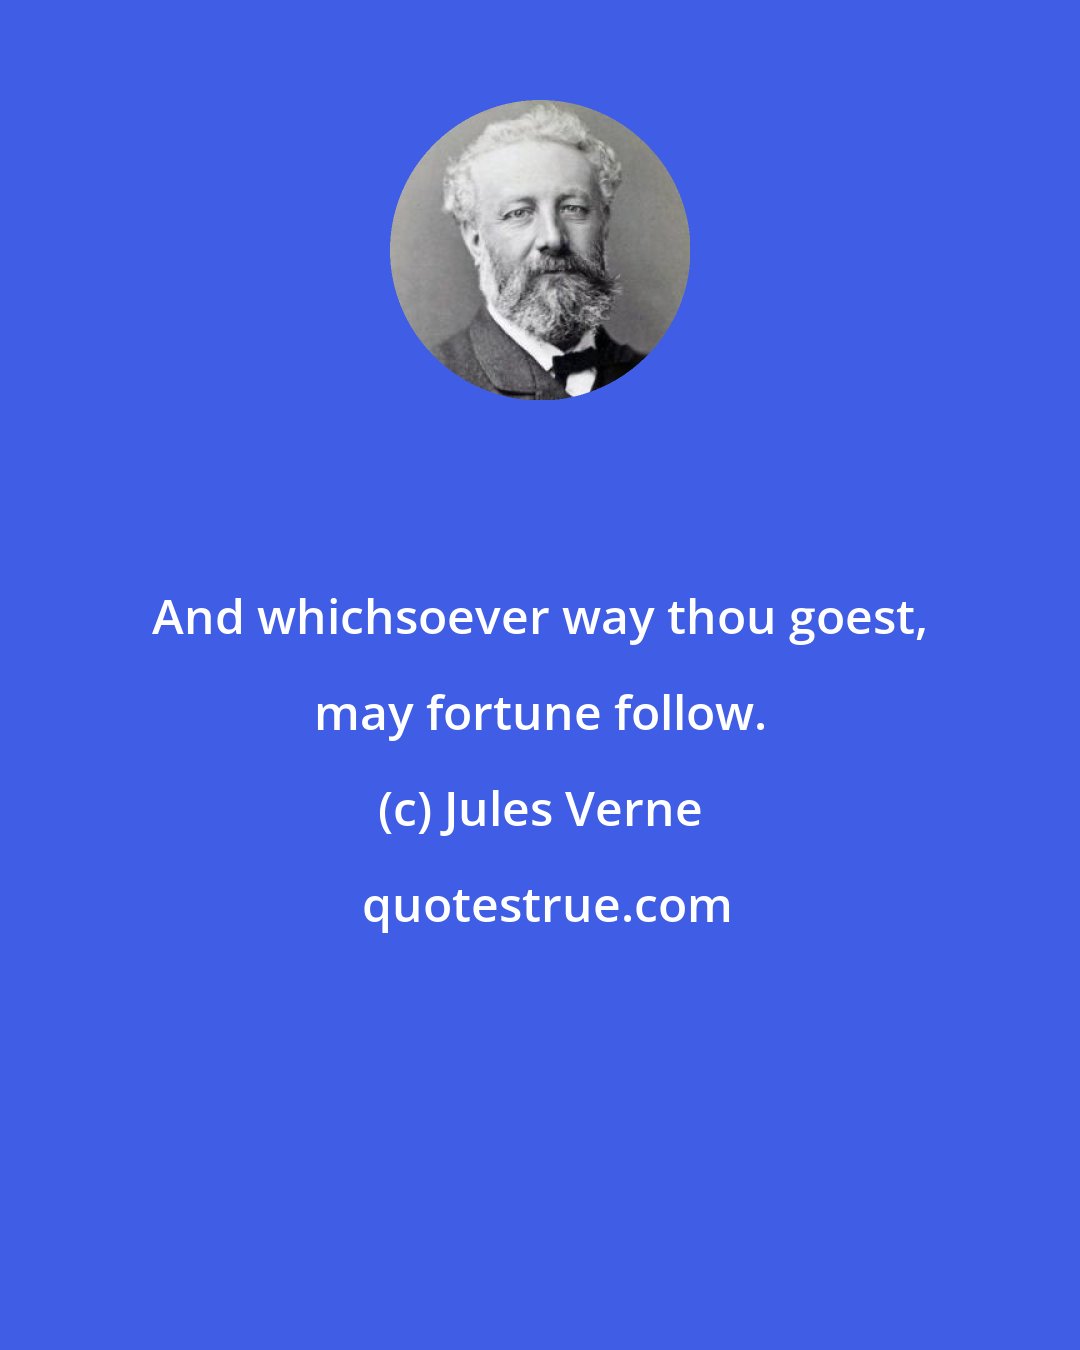 Jules Verne: And whichsoever way thou goest, may fortune follow.